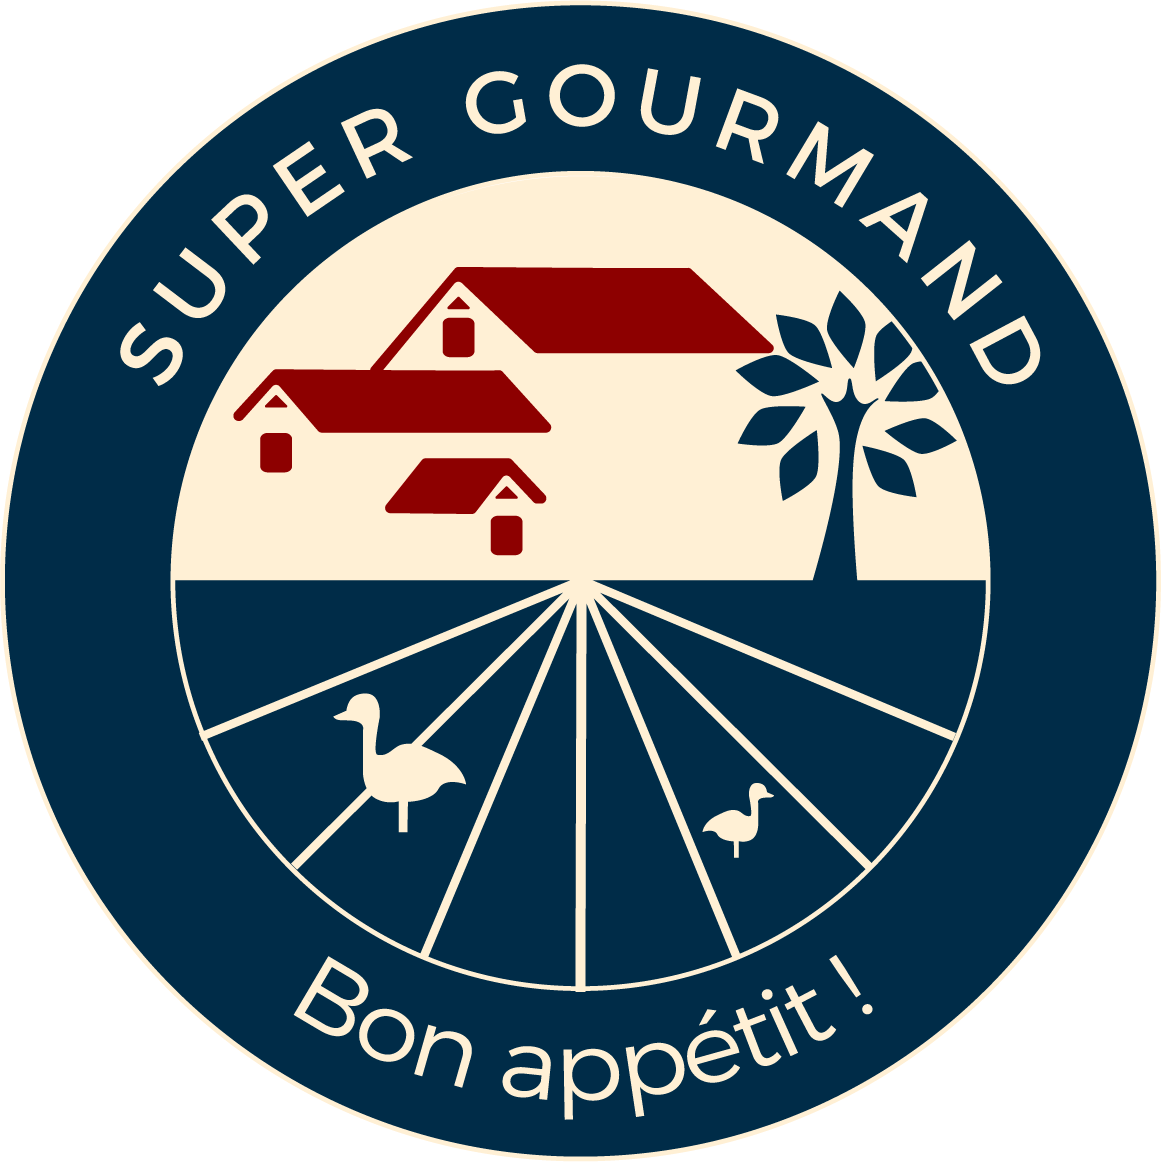 Super Gourmand logo with a circular design. At the top, the text 'RELAIS GOURMET' is arched over a navy blue background. Below, a stylized illustration of a red farmhouse with a white tree stands at the center of a field divided into radial sections, representing a landscape. At the bottom of the circle, it reads 'MAISON GASTRONOMIQUE AU PAYS BASQUE', indicating a gastronomic house in the Basque Country. The logo's background is cream and navy blue, and there are images of two cream-colored ducks at the bottom, one on each side, completing the design.